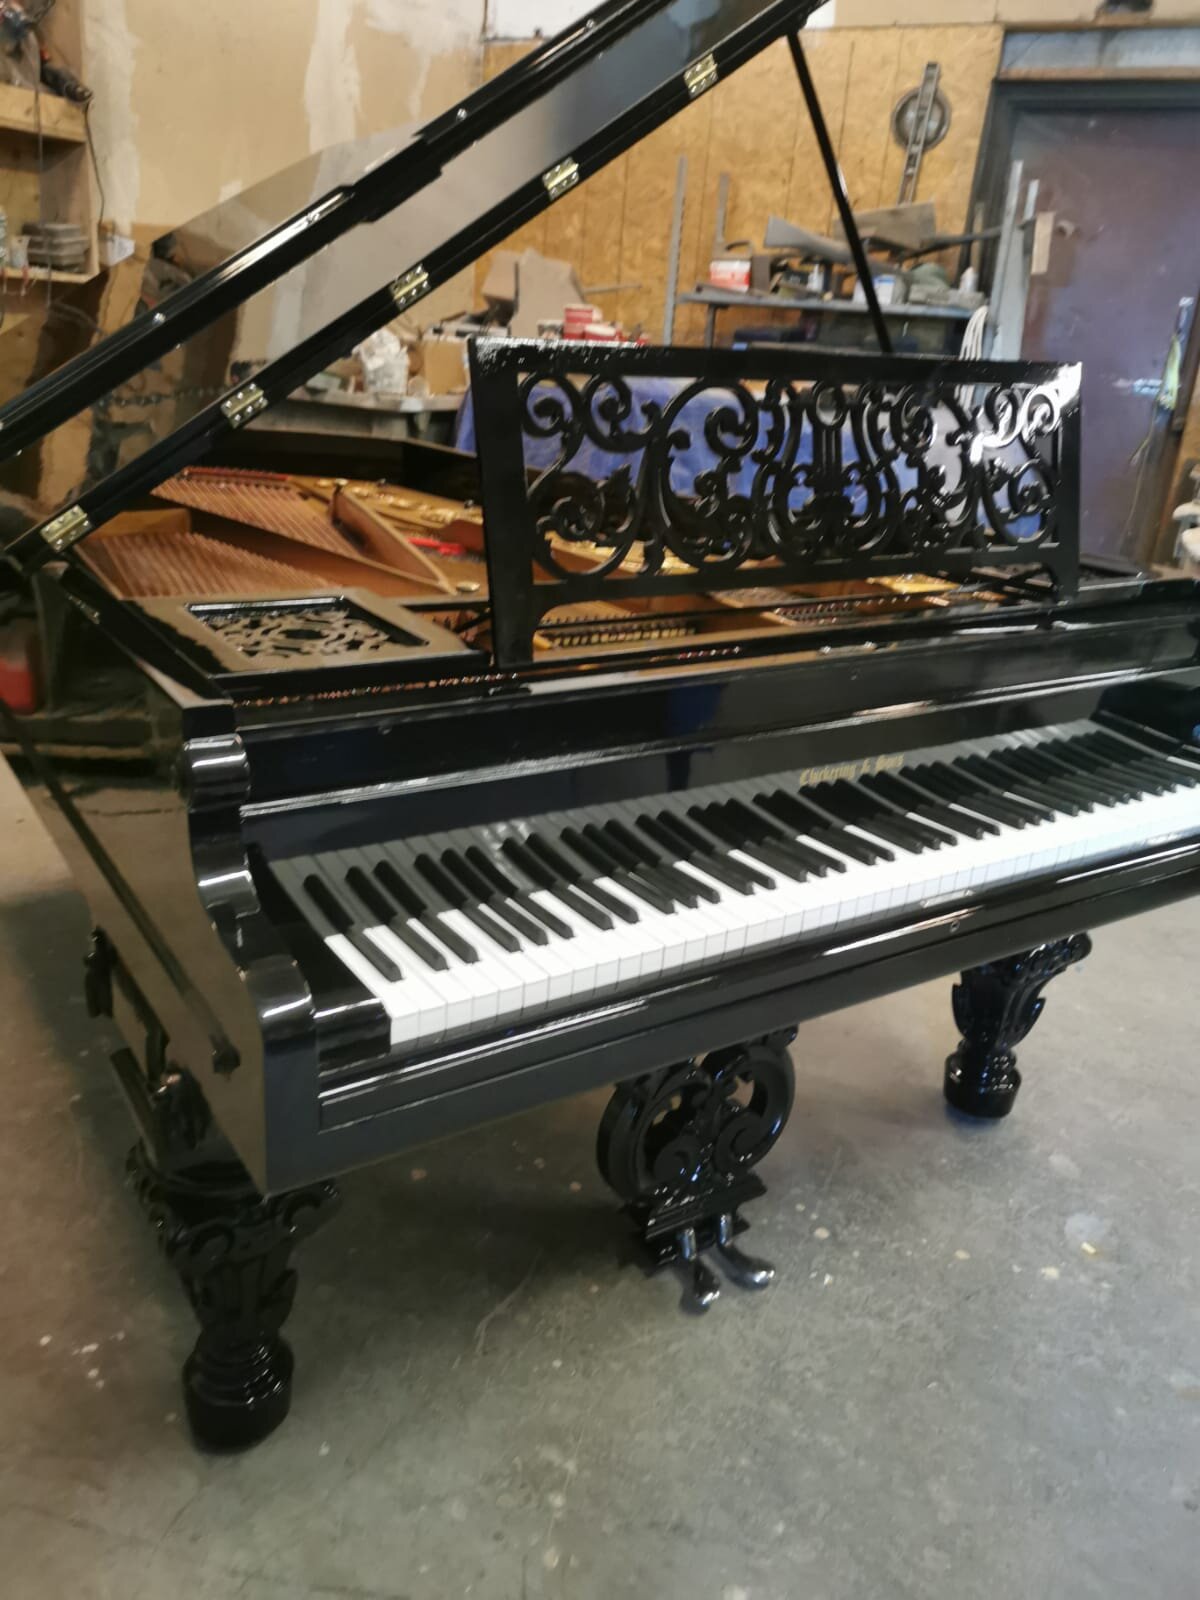 Chickering piano for sale2.jpeg